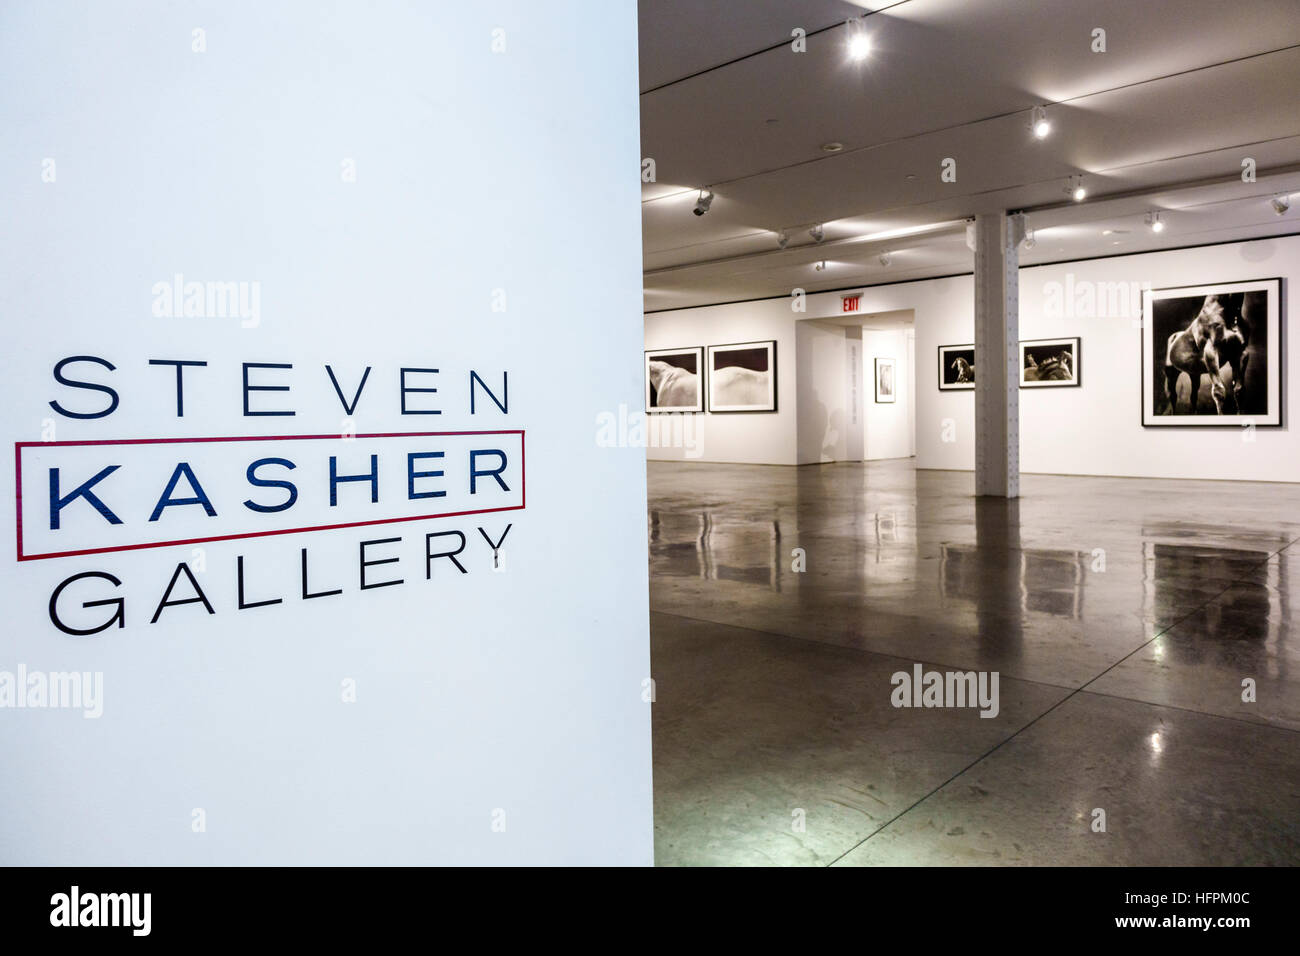 New York City,NY NYC Manhattan,Chelsea,Steven Kasher Gallery,photography,contemporary art,exhibit exhibition collection exhibit,American Thoroughbred, Stock Photo